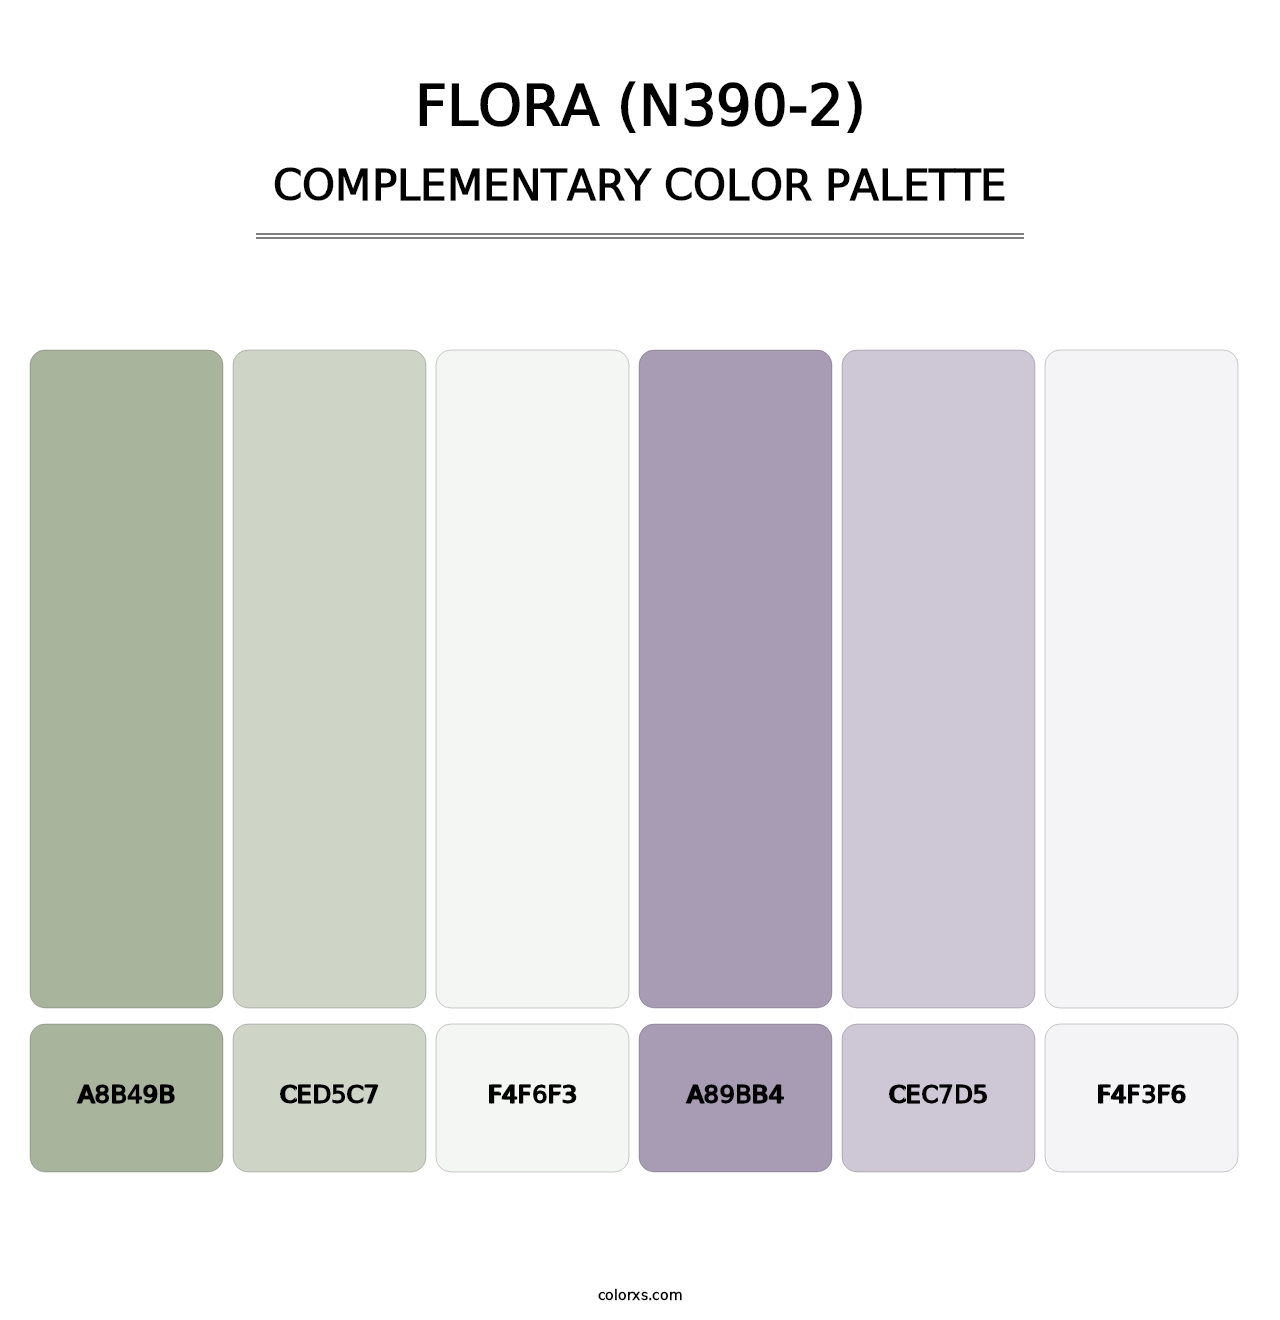 Flora (N390-2) - Complementary Color Palette